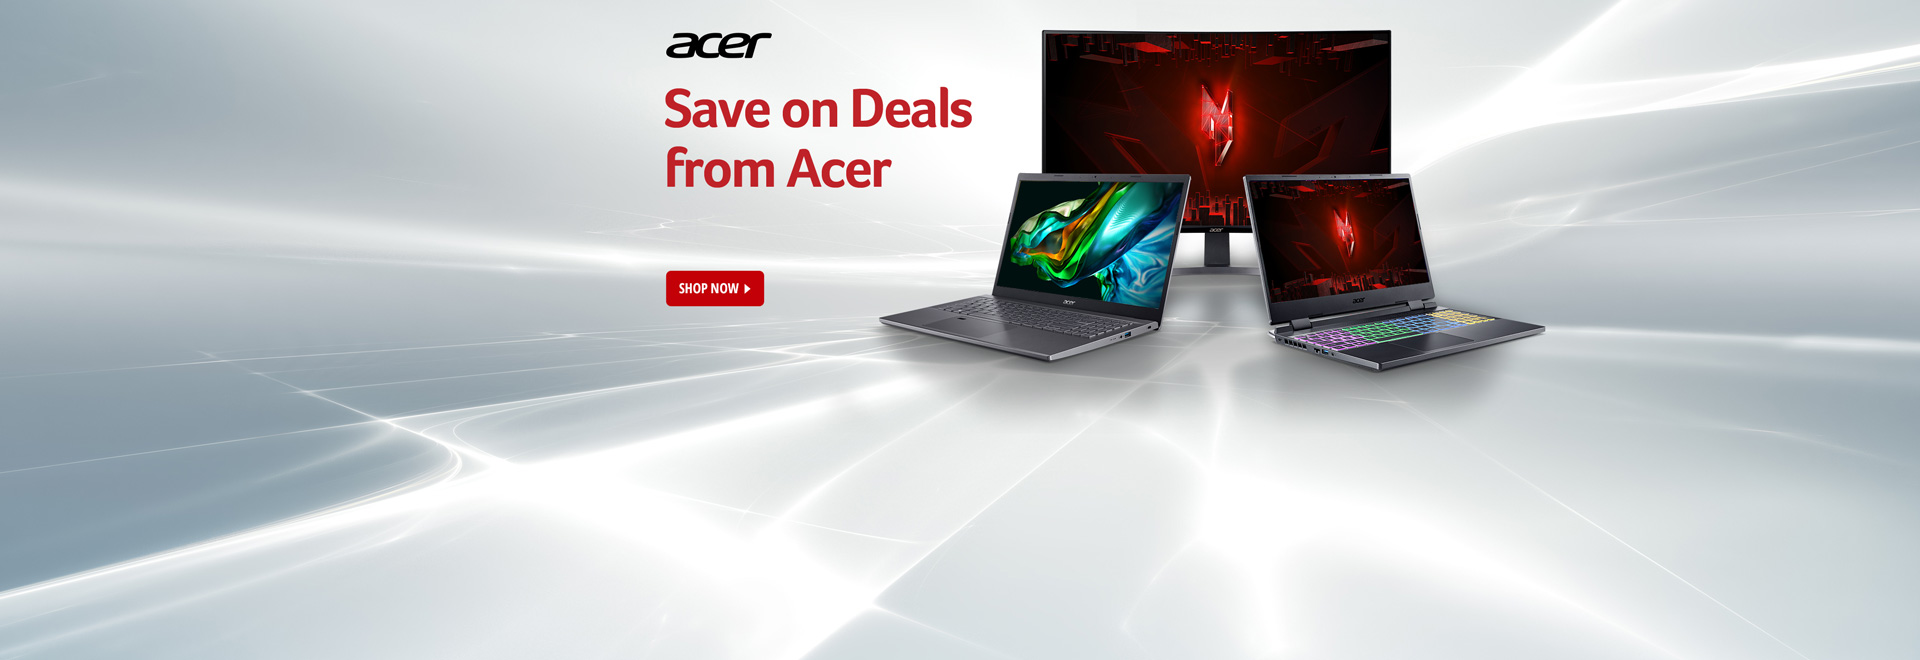 Save on deals from Acer